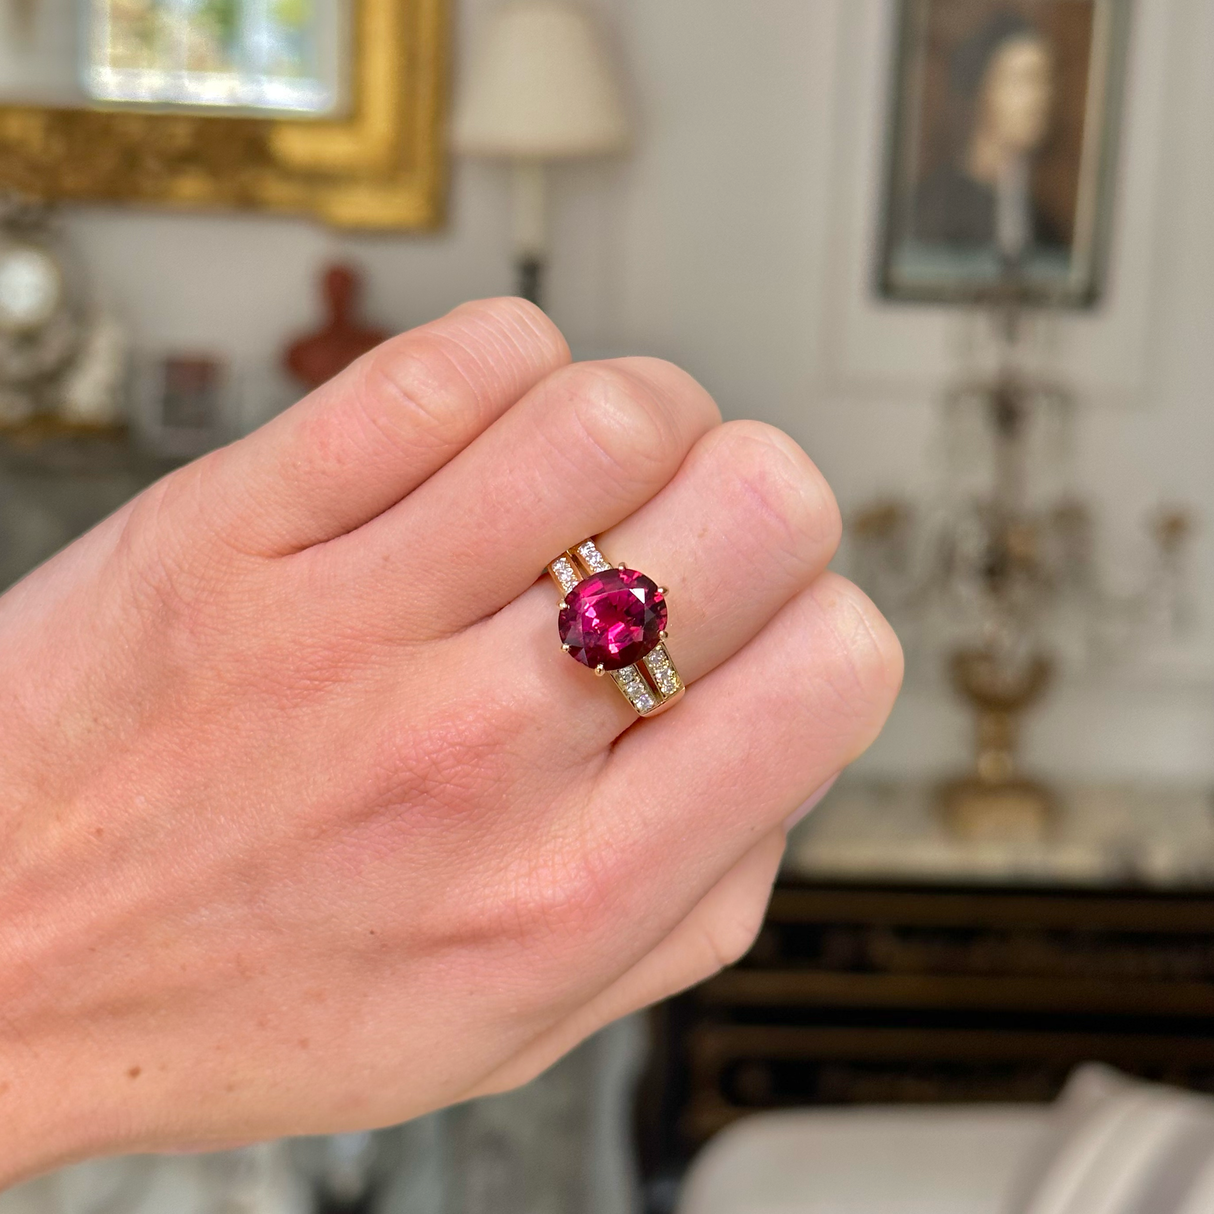 Red tourmaline and diamond cocktail ring, worn on closed hand, front view. 